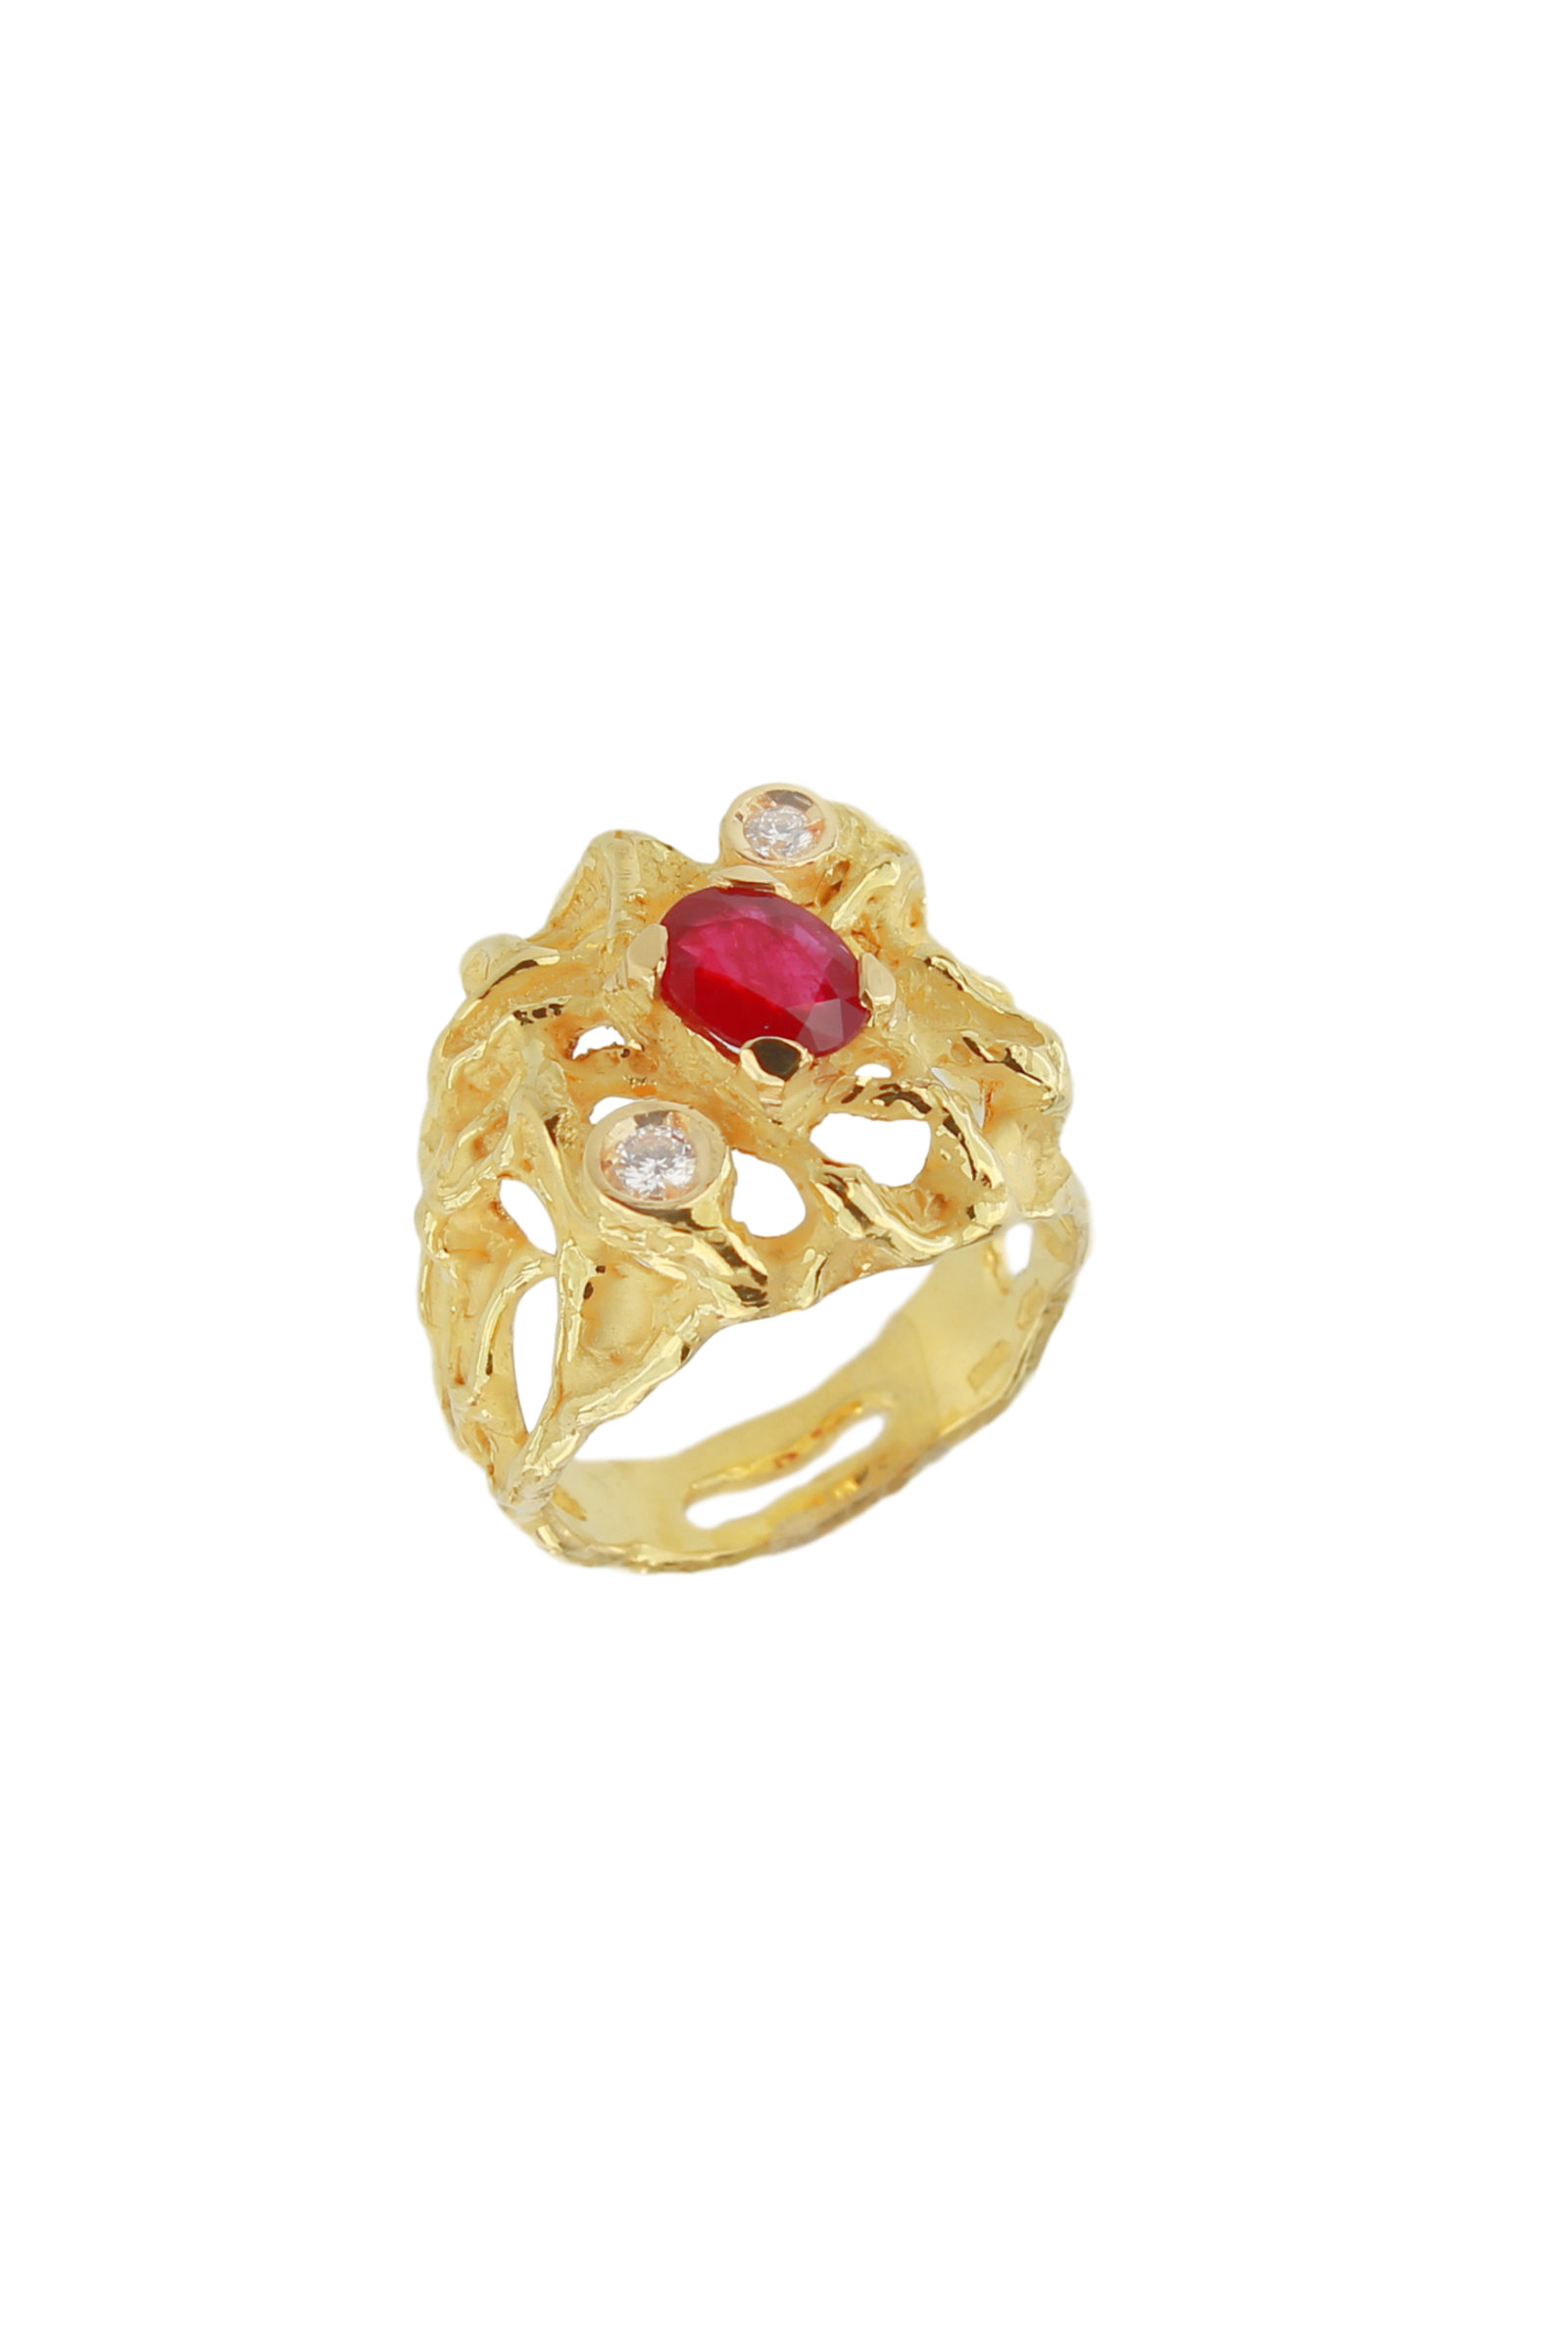 SE173A-18-Kt-Yellow-Gold-Ring-with-Rubies-and-Diamonds-1